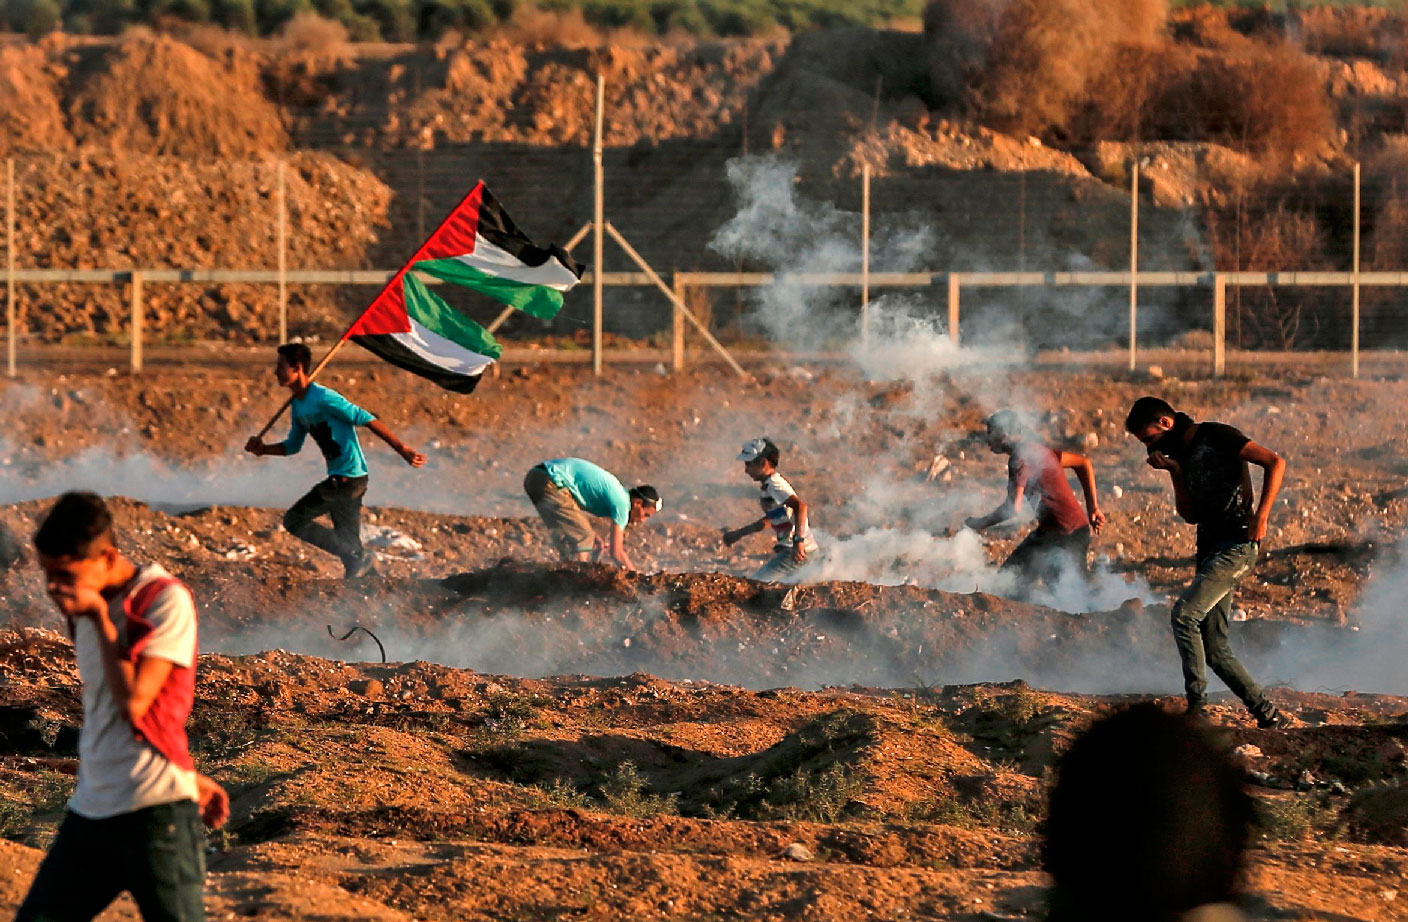 Palestinian protesters react to tear gas fired by Israeli forces during clashes east of Gaza City near the Israeli border on November 2, 2018.